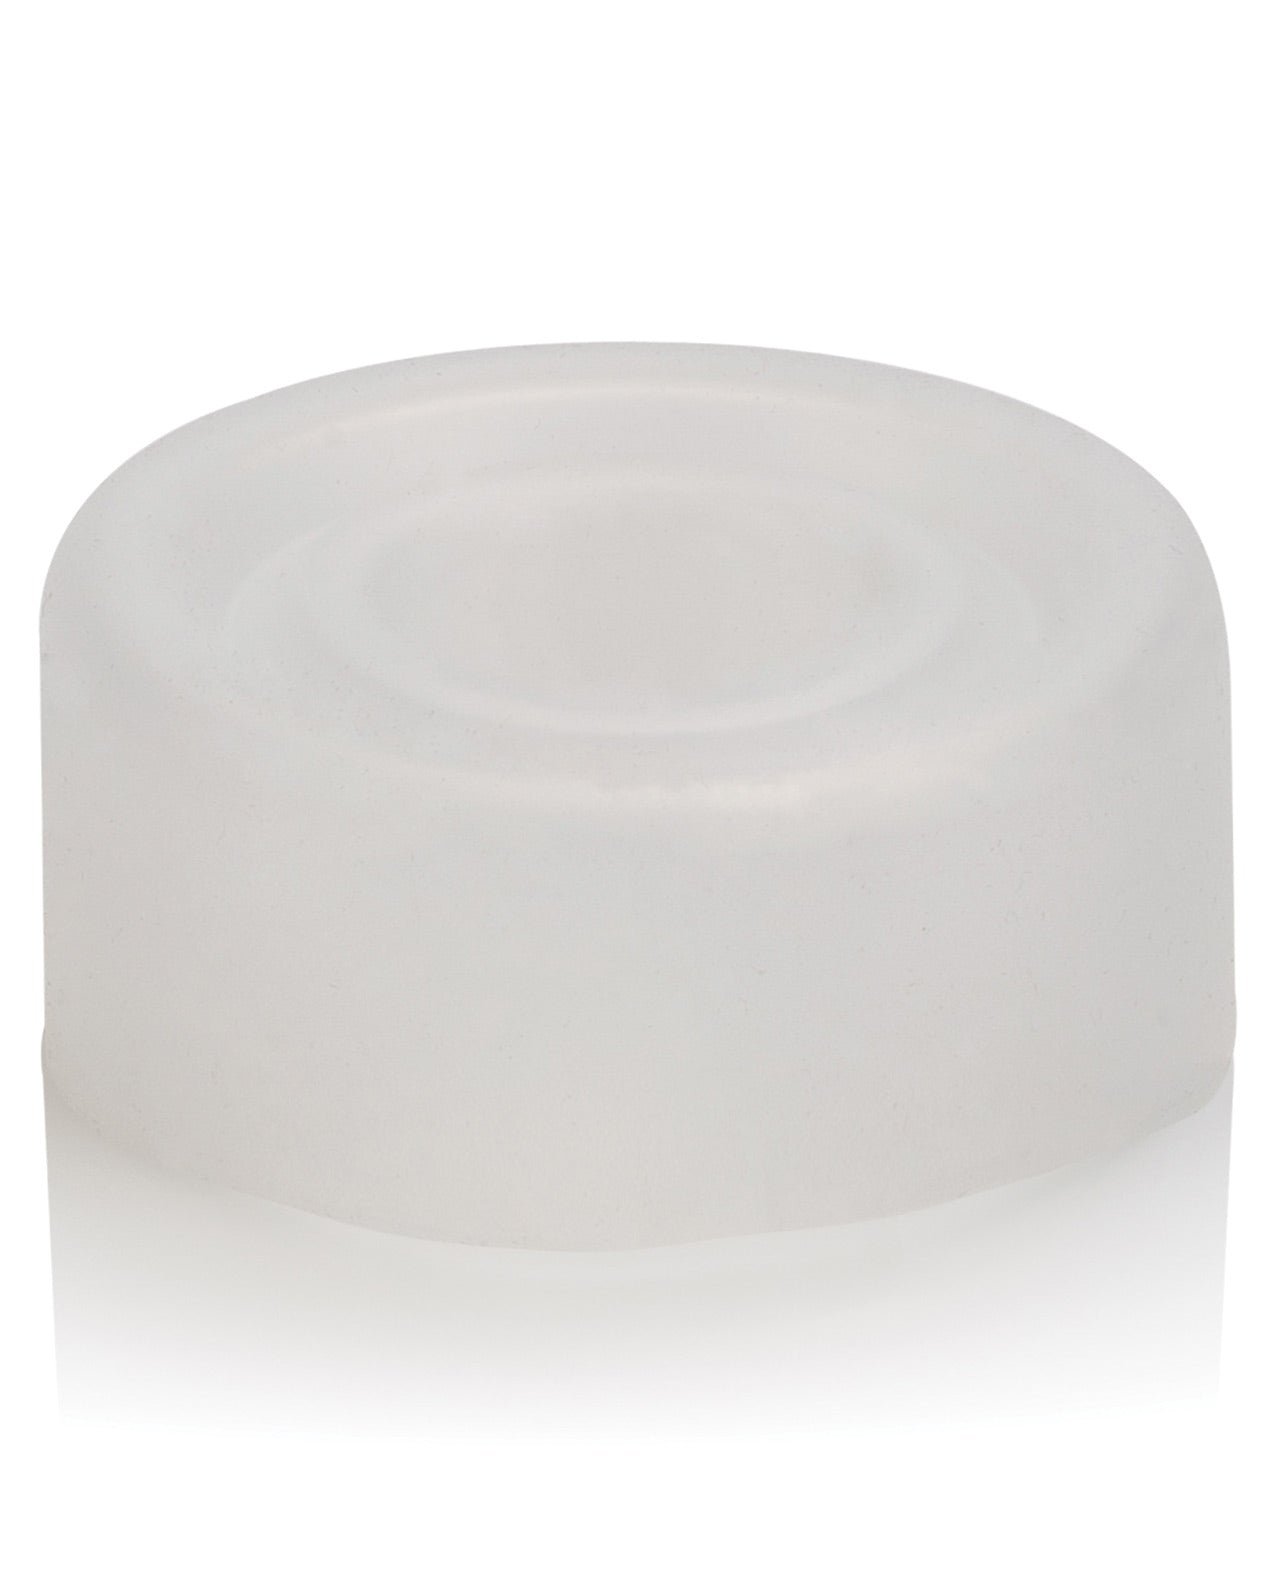 Advanced Silicone Pump Sleeve - Clear - LUST Depot